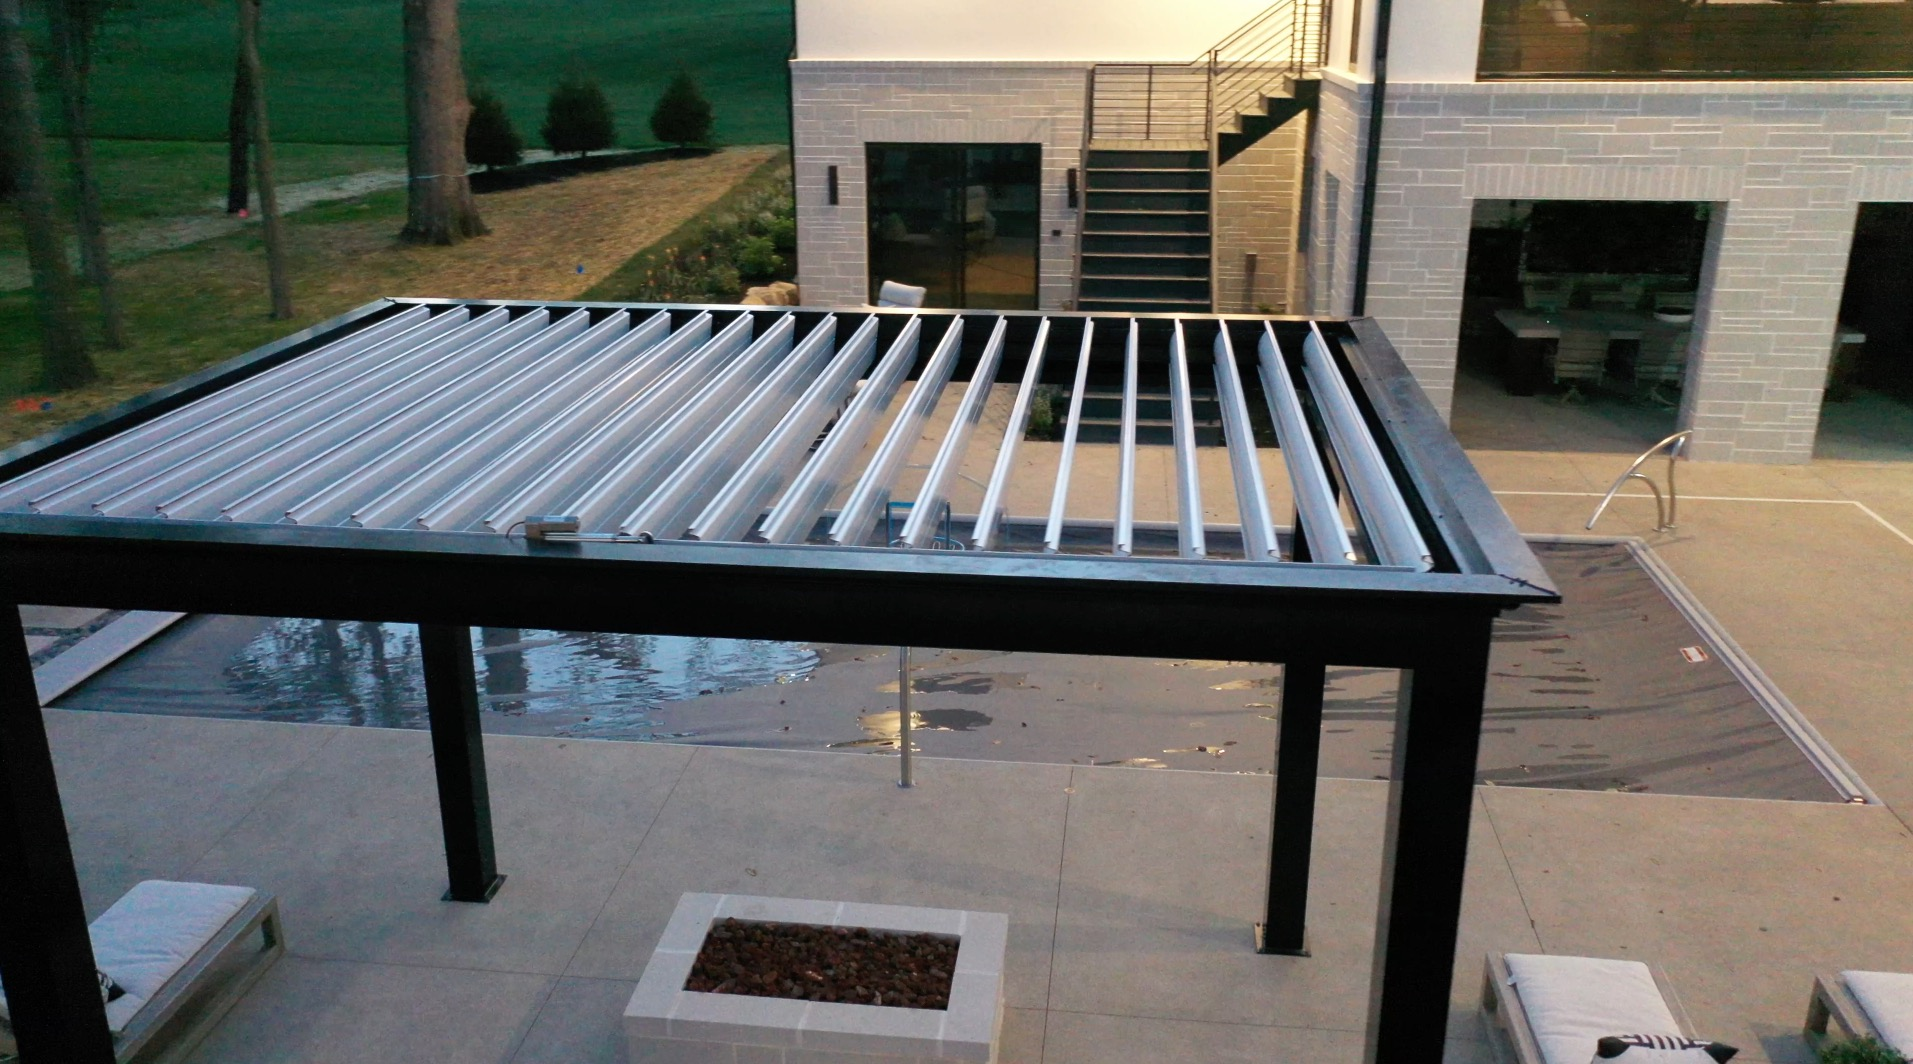 Louvered Roof Pergola In Outdoor Space